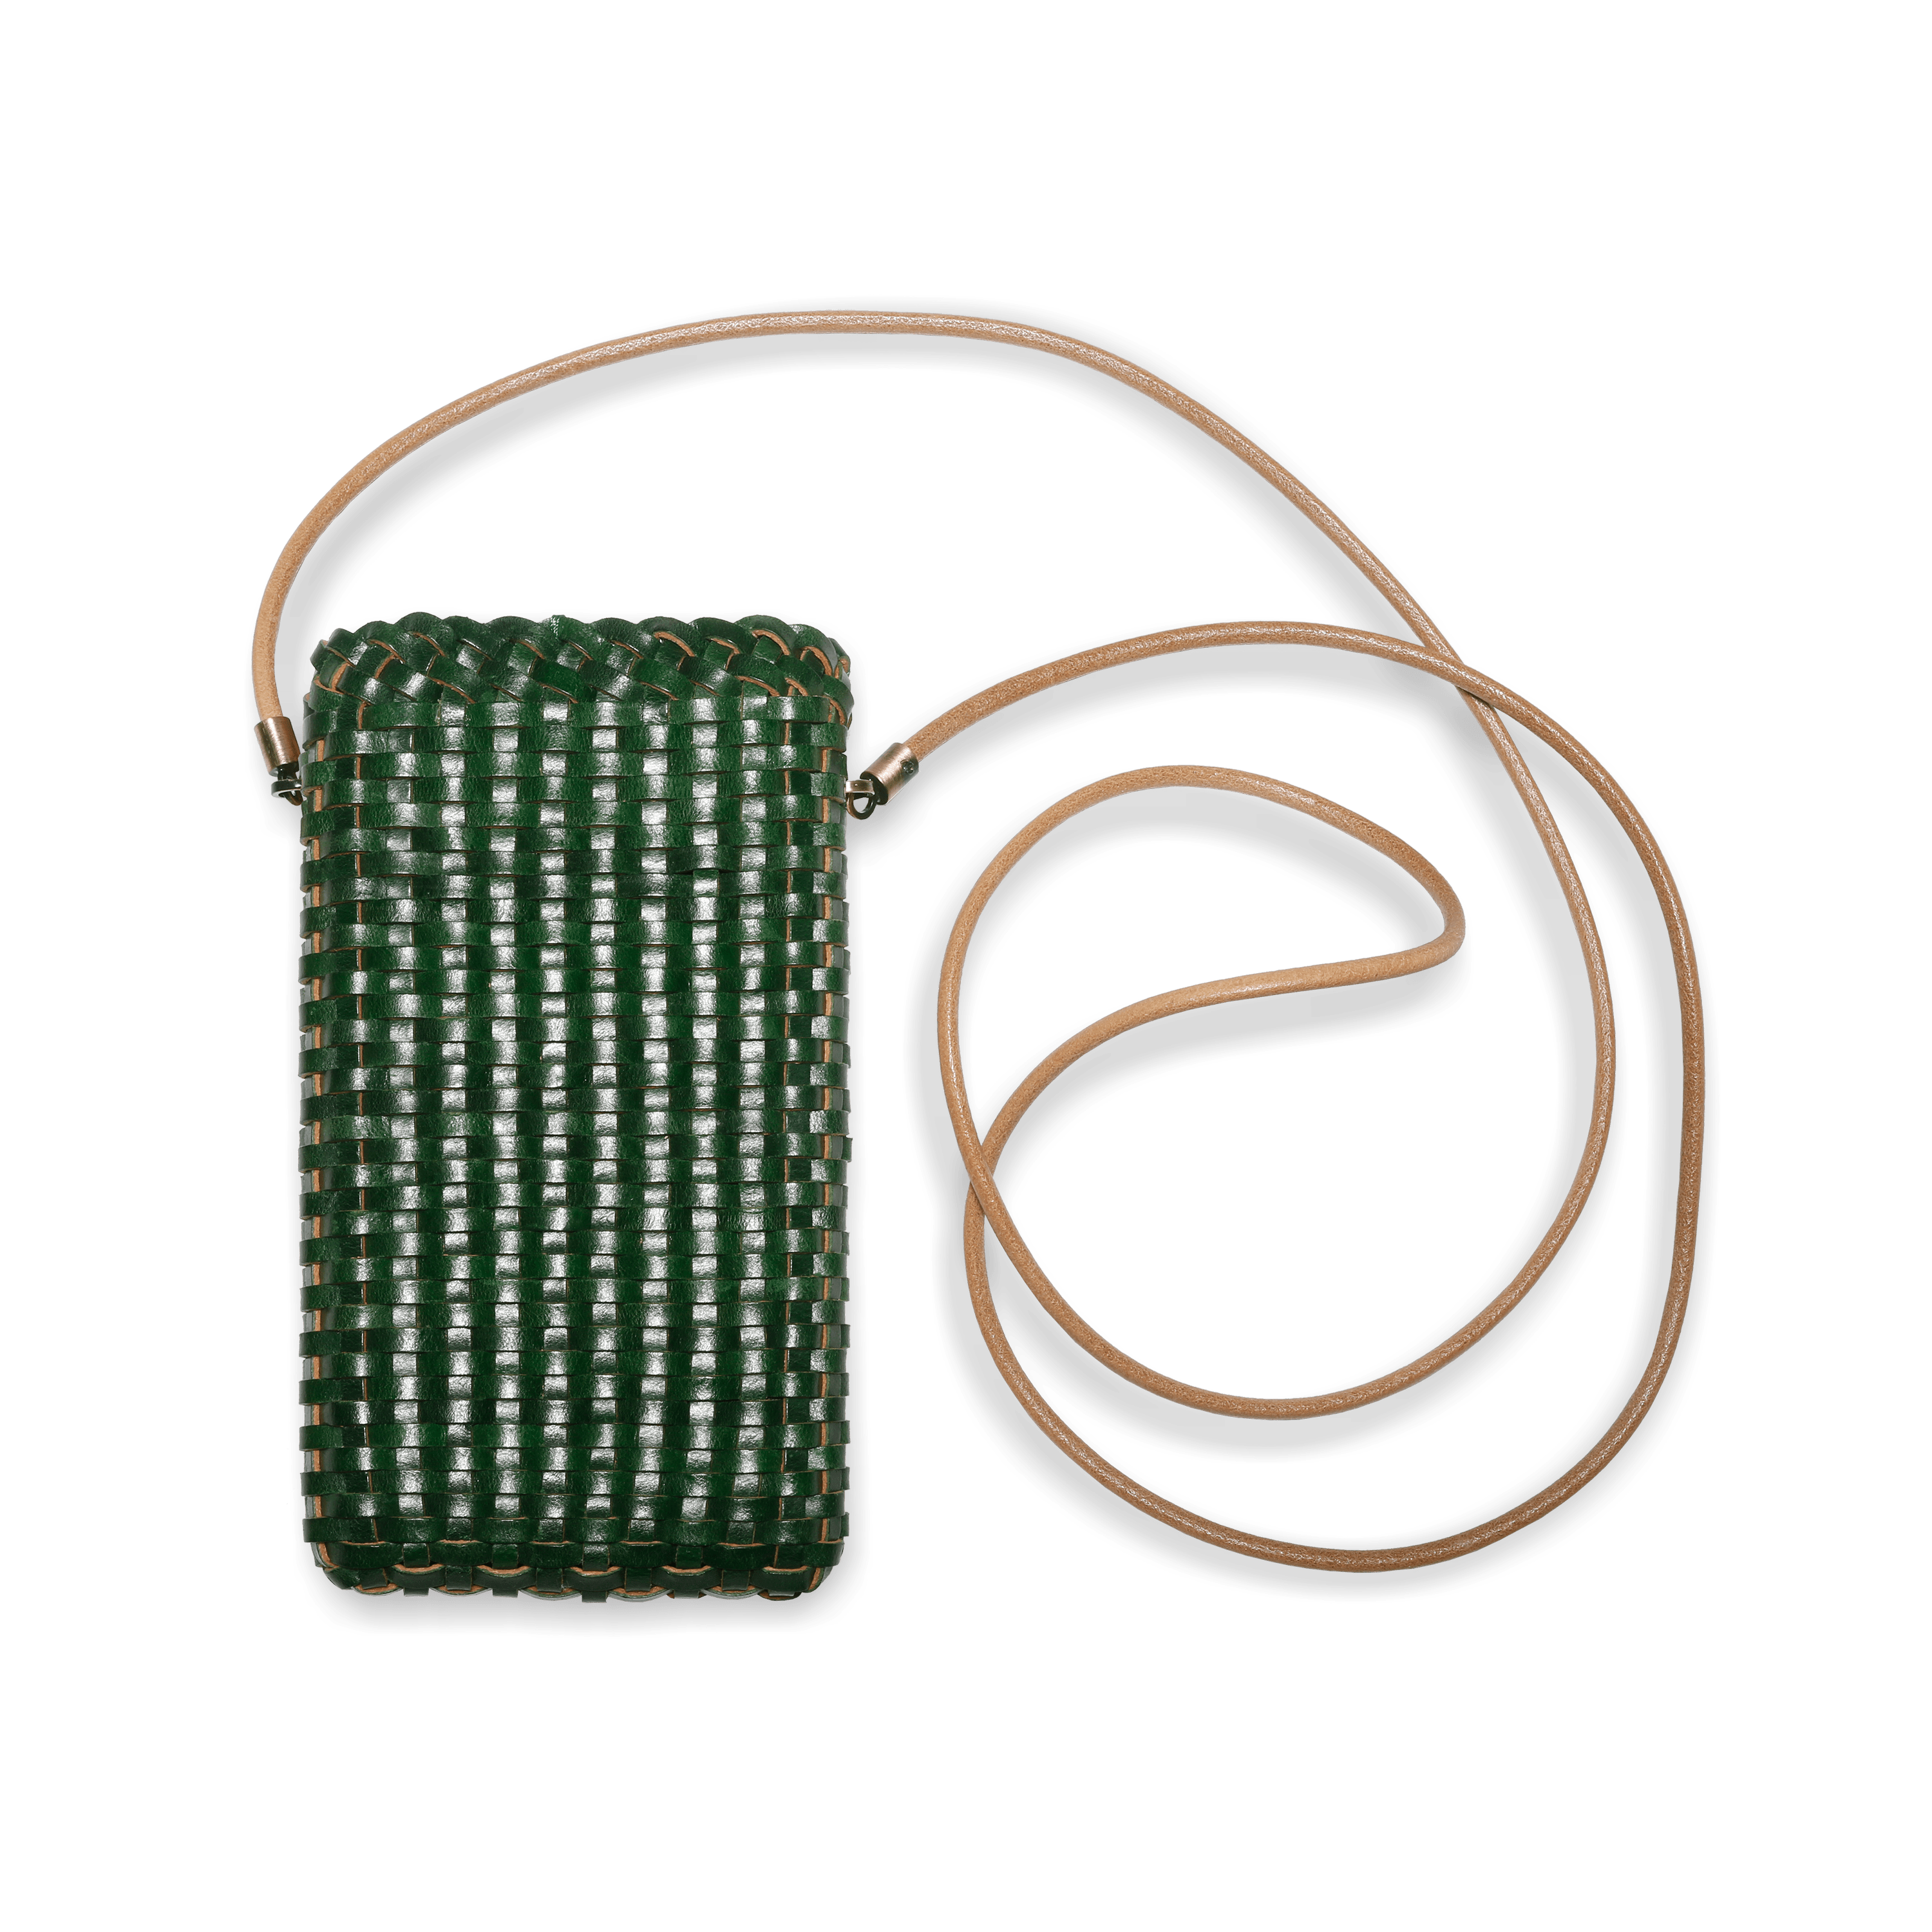 Phone Pouch with Strap